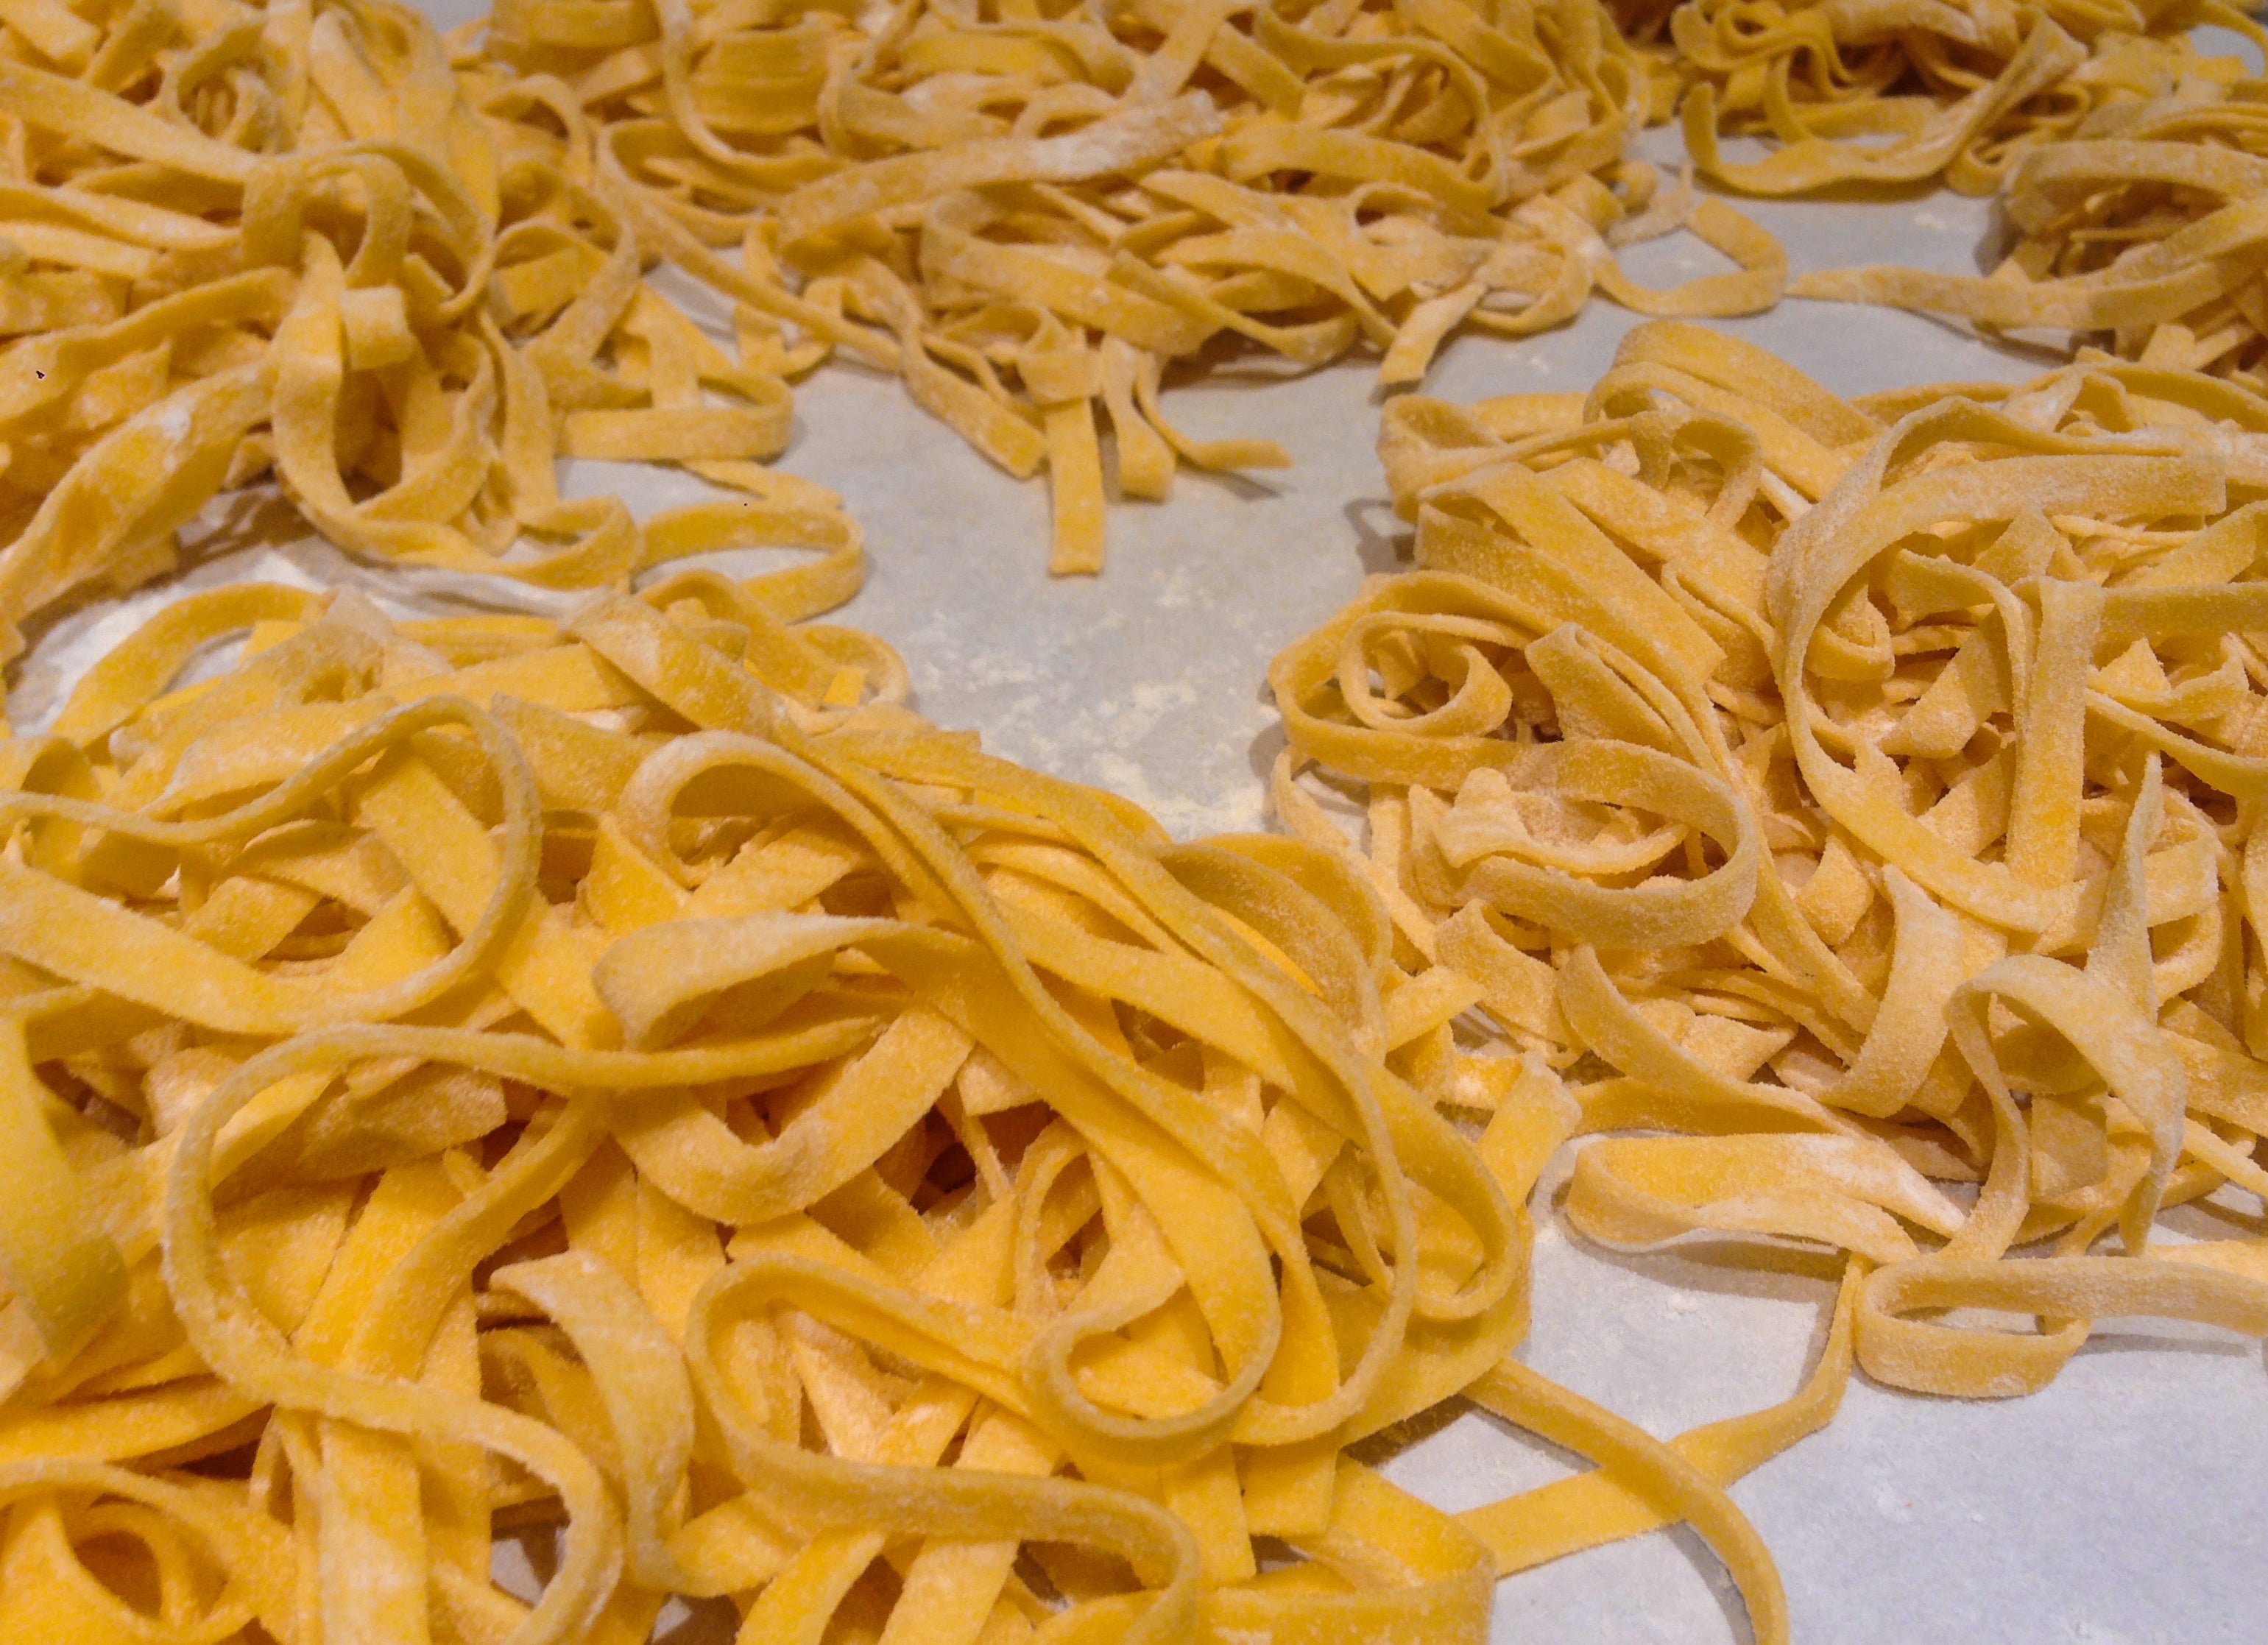 Making your own pasta is easy